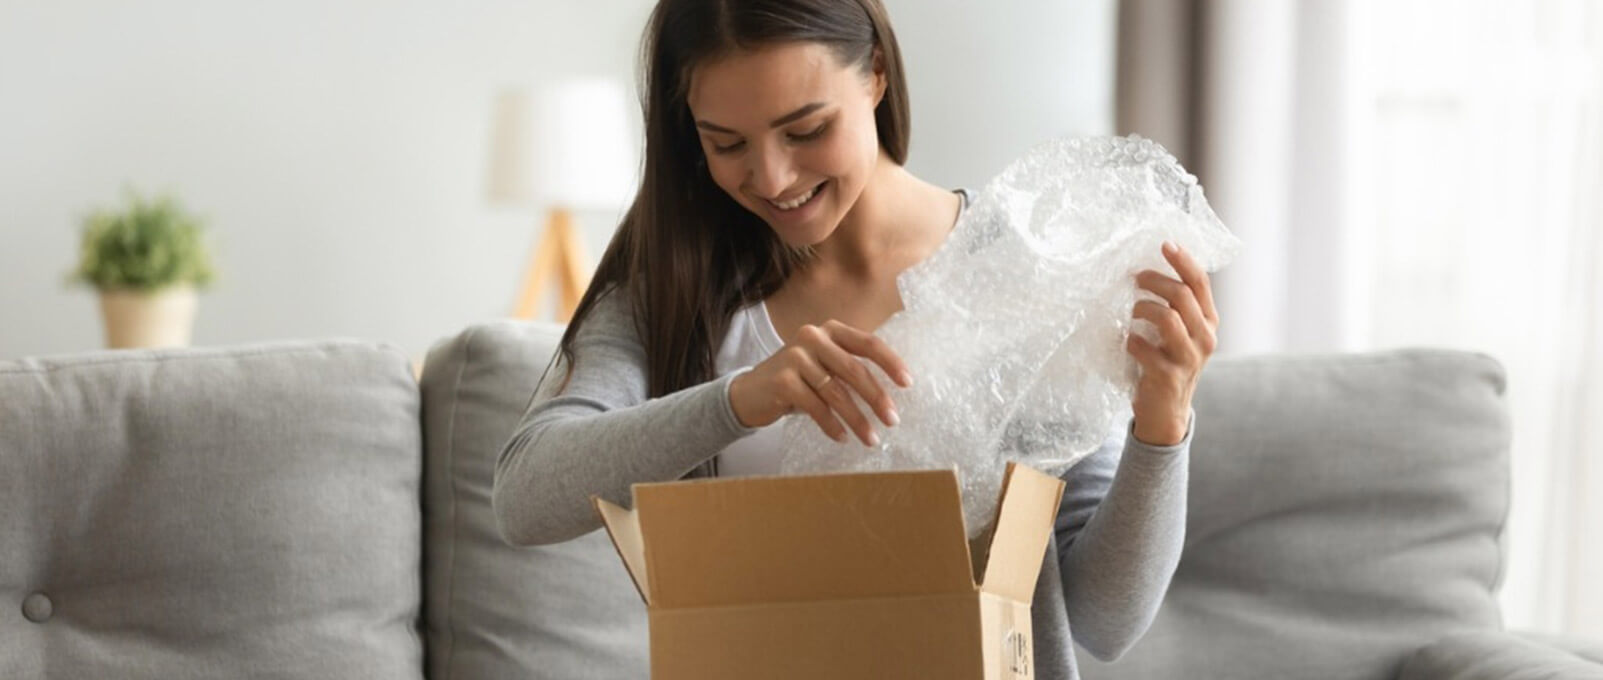 Happy young woman open cardboard box satisfied with purchase online shop order sit on sofa at home, smiling lady customer receive unpack parcel look inside, postal shipping courier service concept